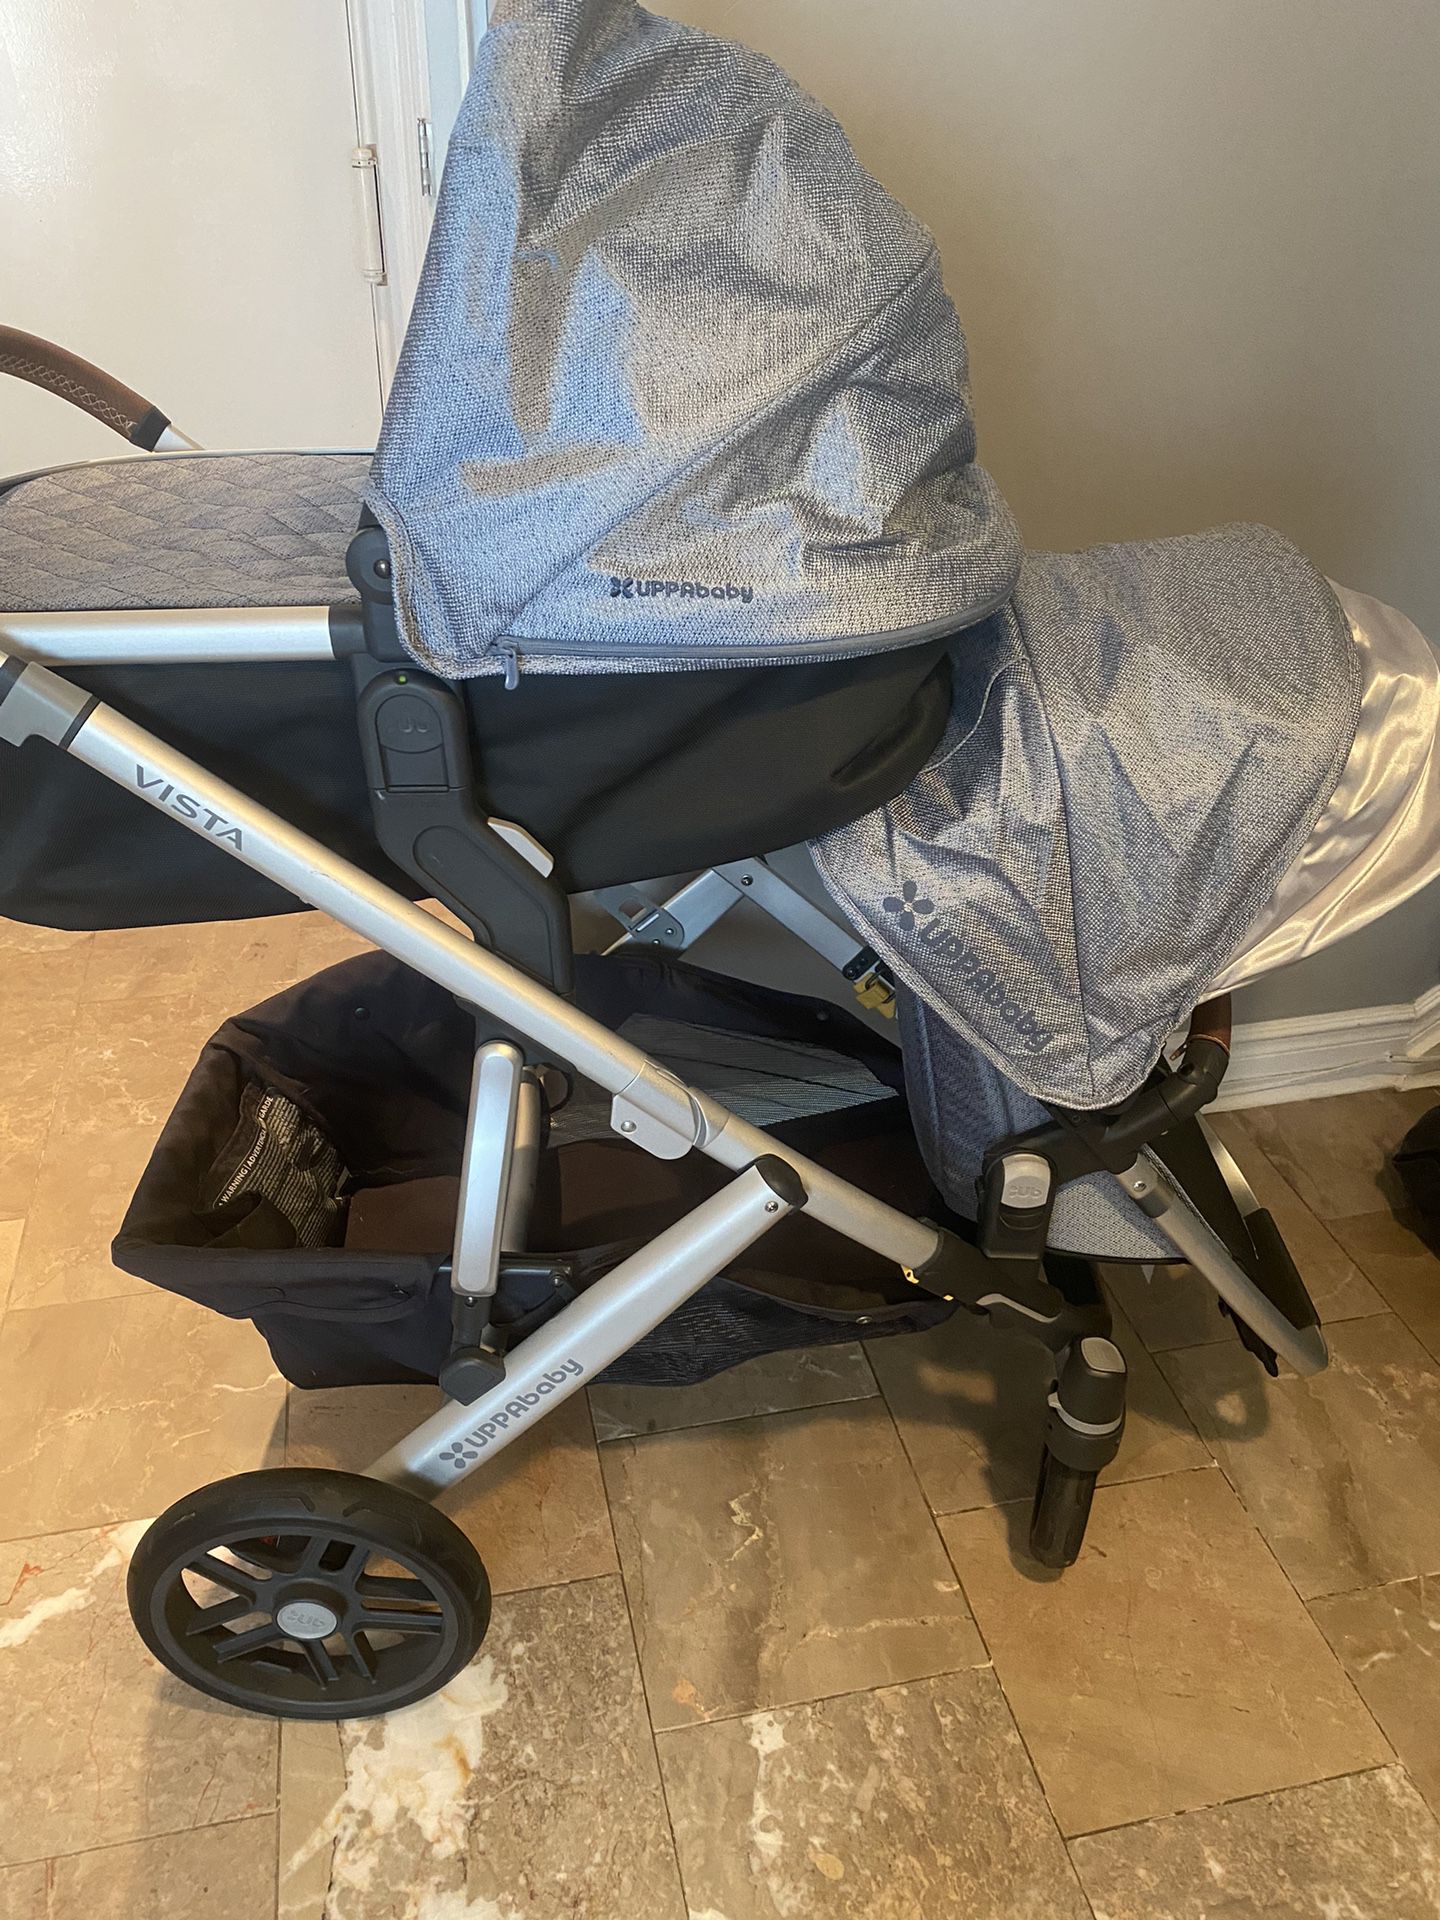 Uppababy Stroller And Travel Accessories 